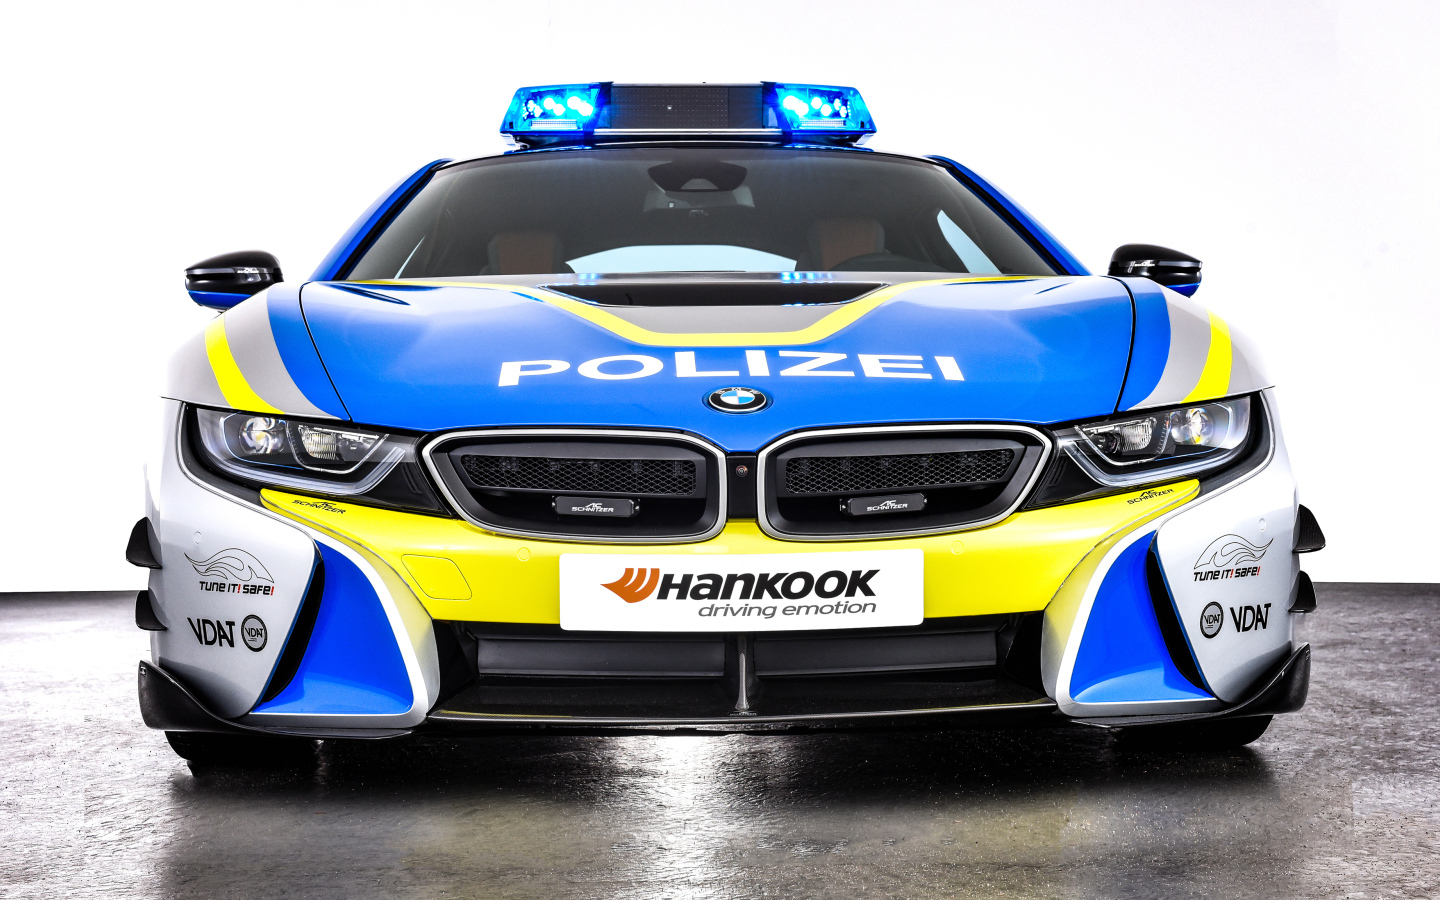 2019 BMW I8 car front view